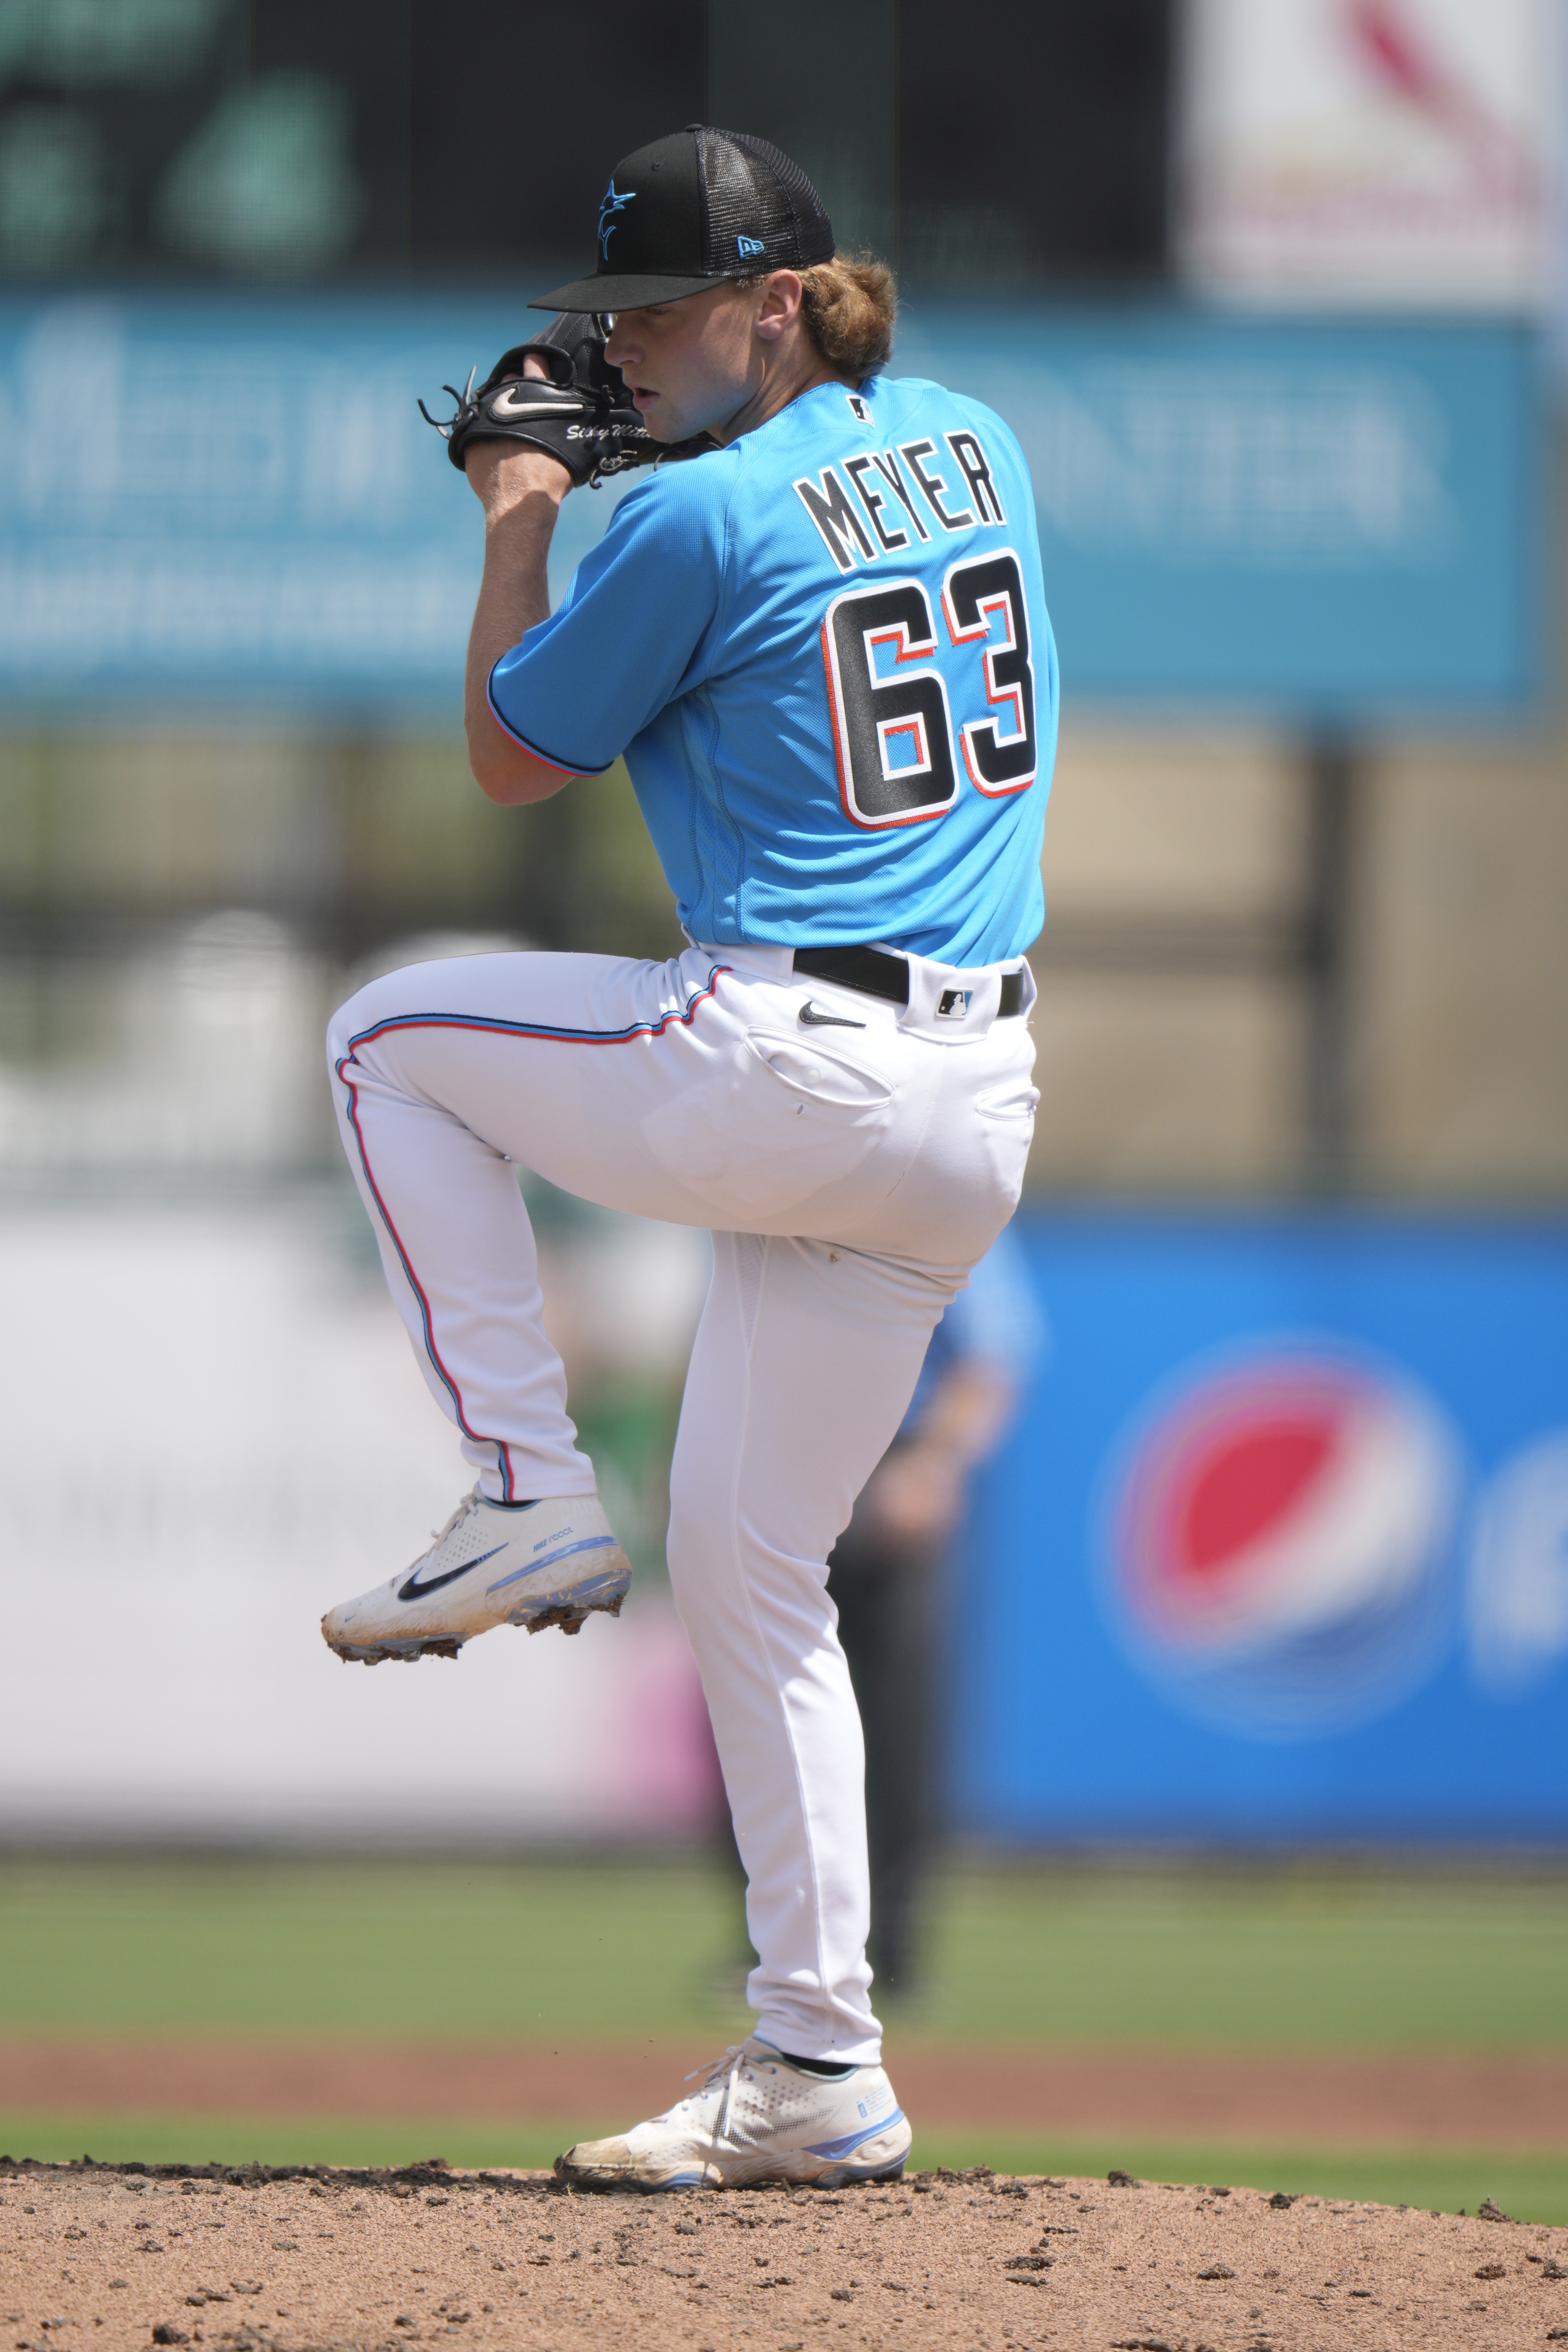 Max Meyer #63 of the Miami Marlins delivers a pitch in the third inning against the New York Mets in the Spring Training game at Roger Dean Stadium on March 21, 2022 in Jupiter, Florida.